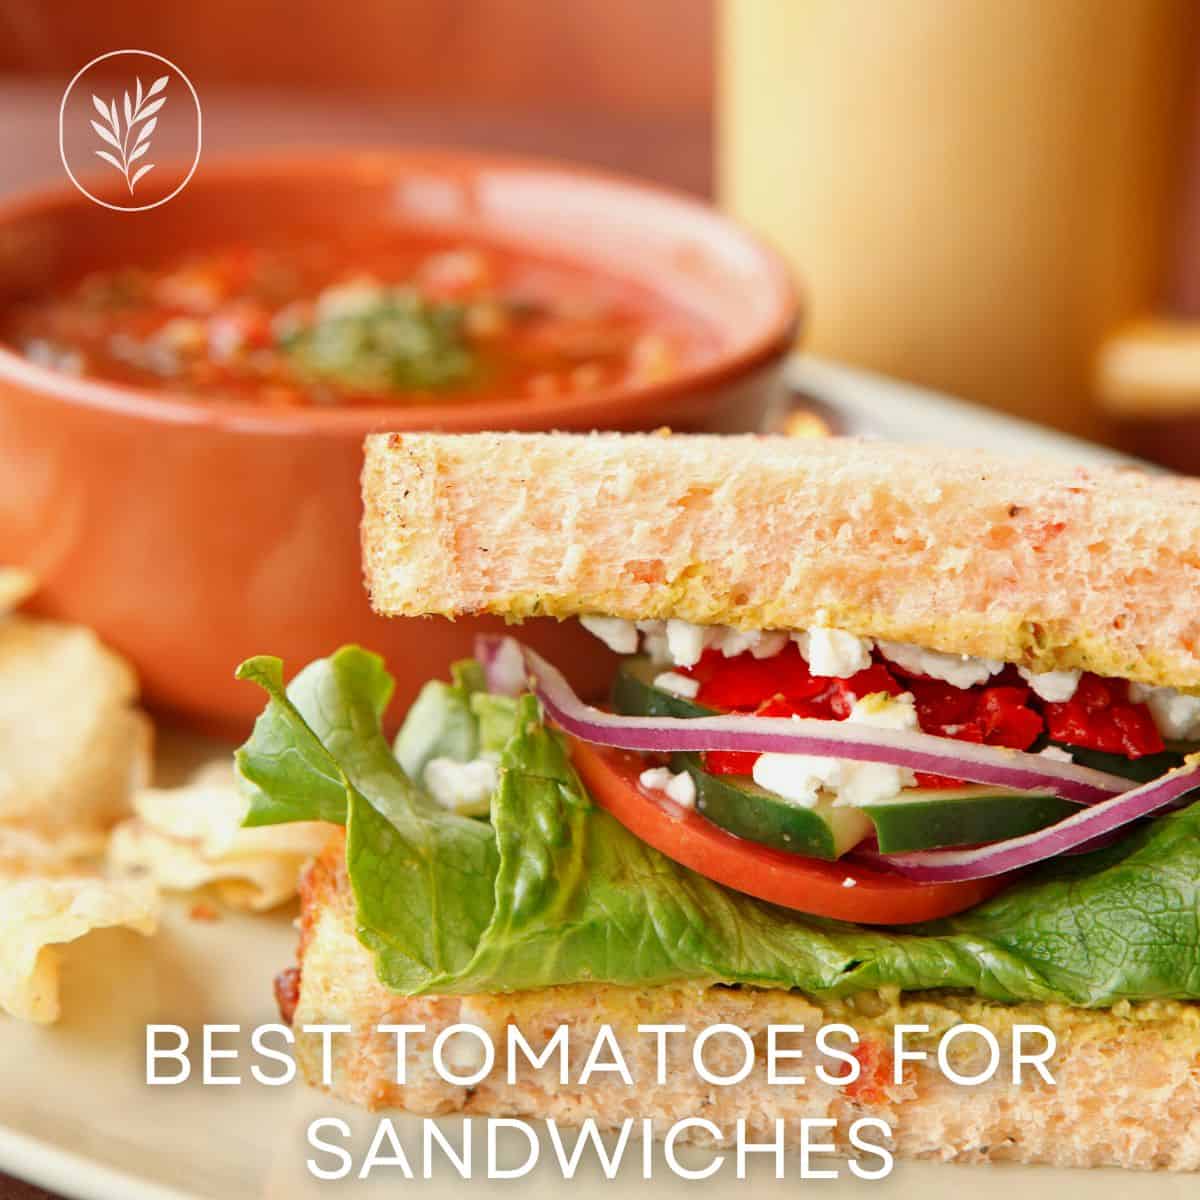 Best tomatoes for sandwiches via @home4theharvest